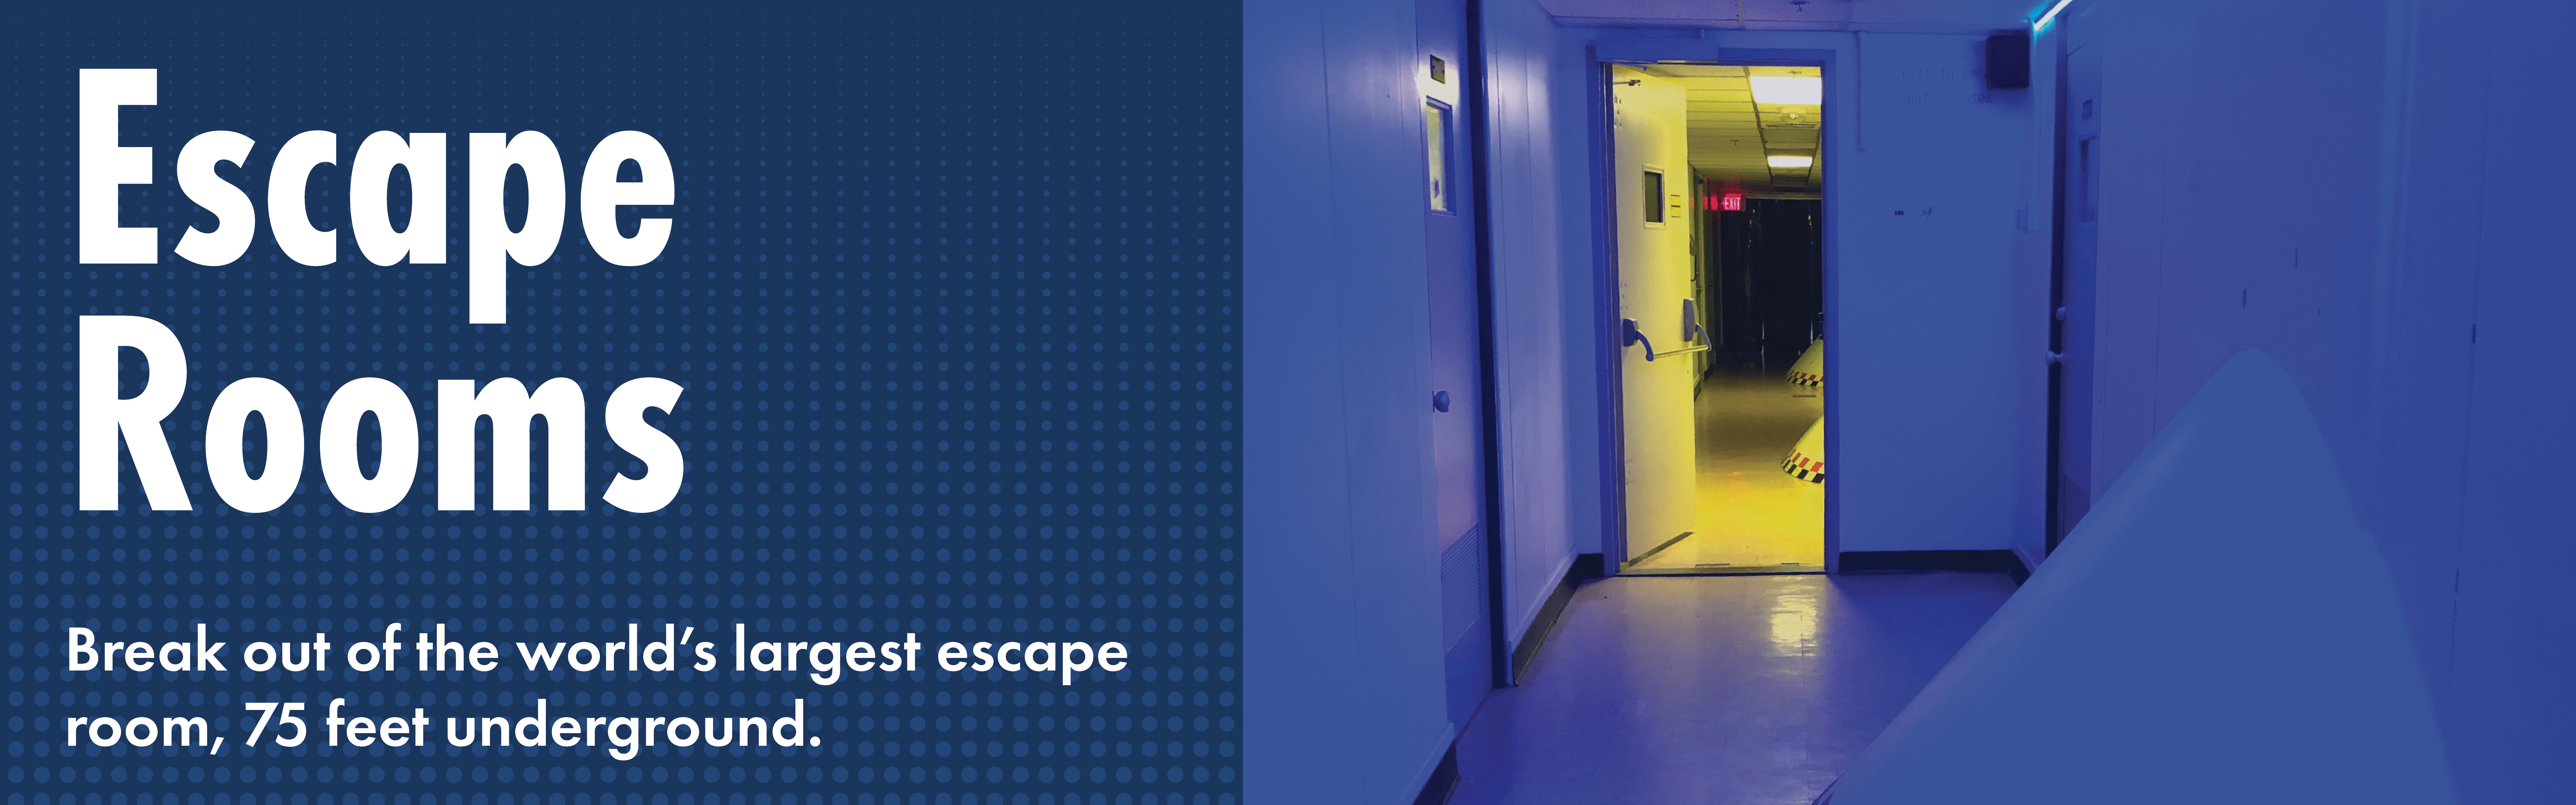 Diefenbunker Escape Rooms banner with image of an empty hallway and glowing light at the end.